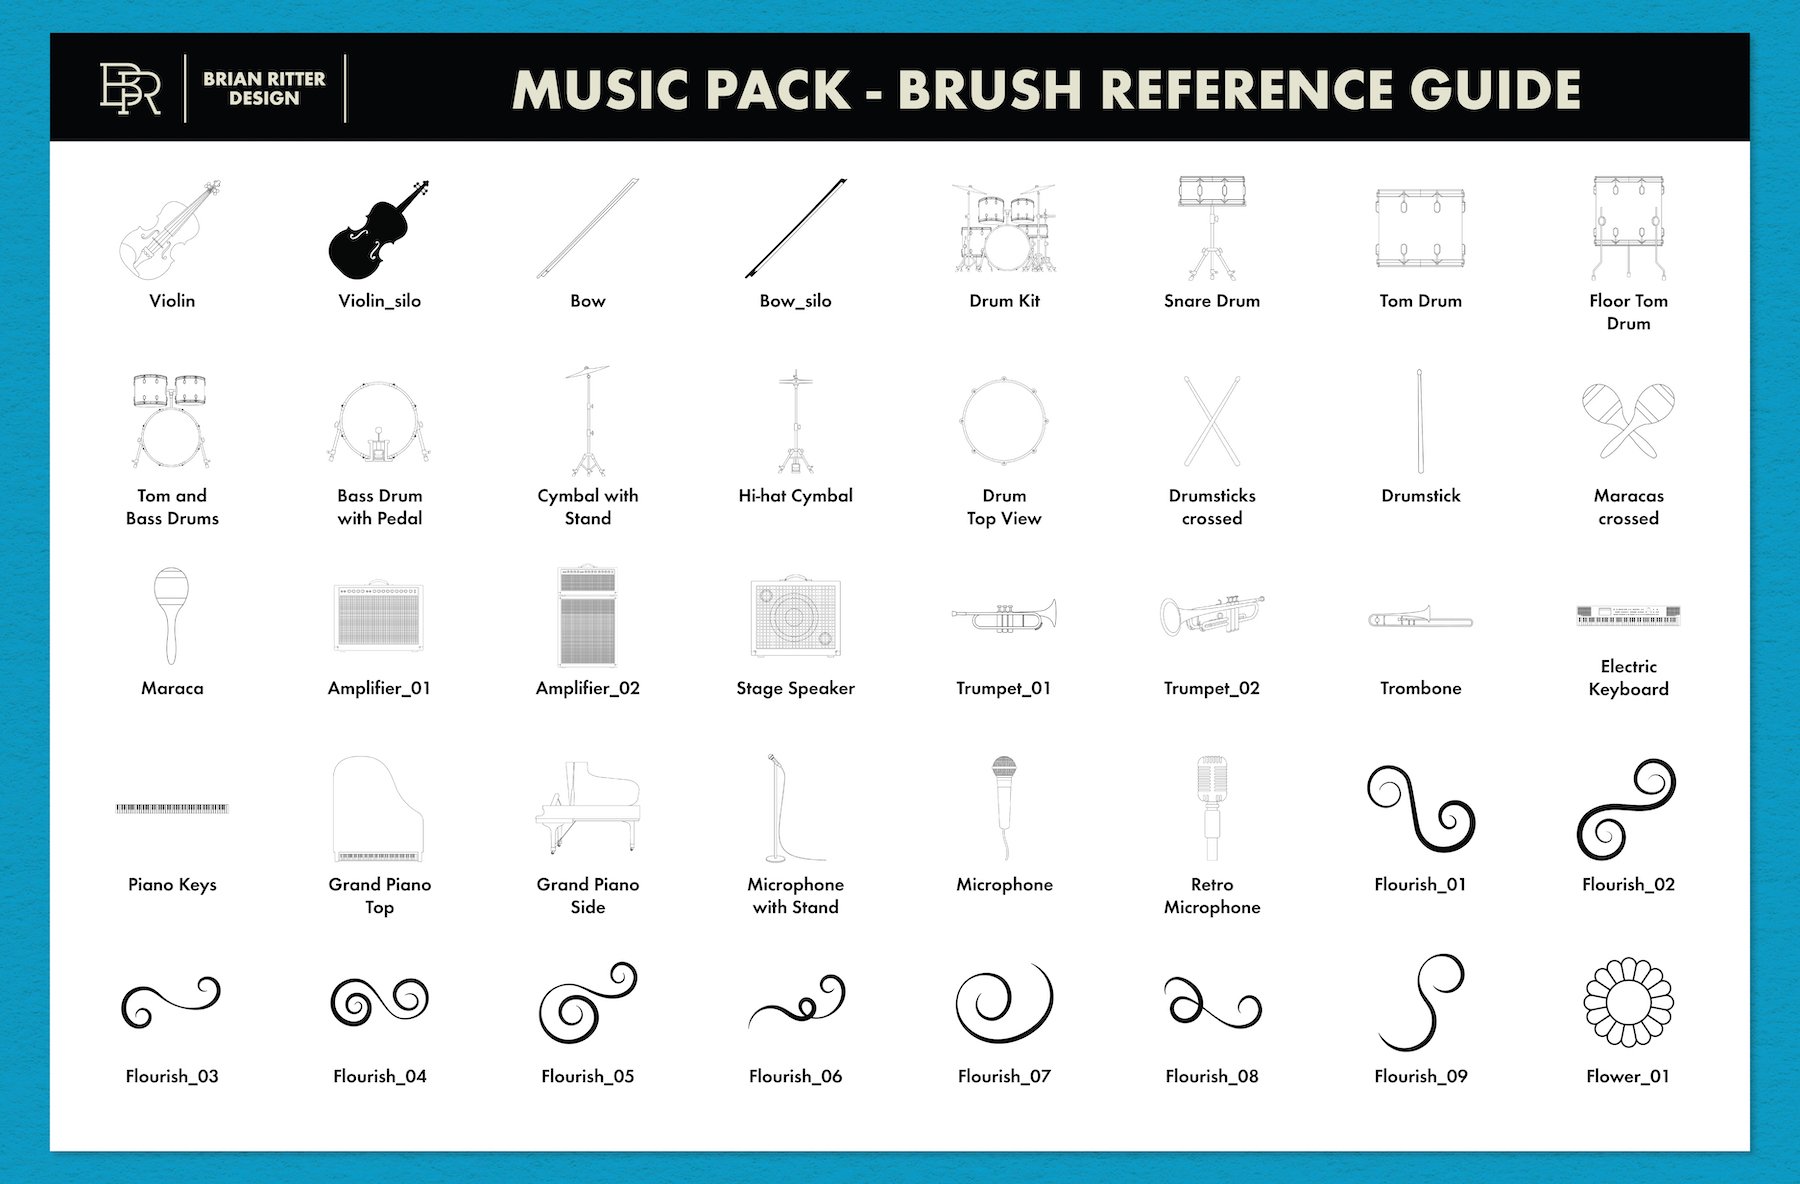 Cute BW brushes for the different music illustrations.